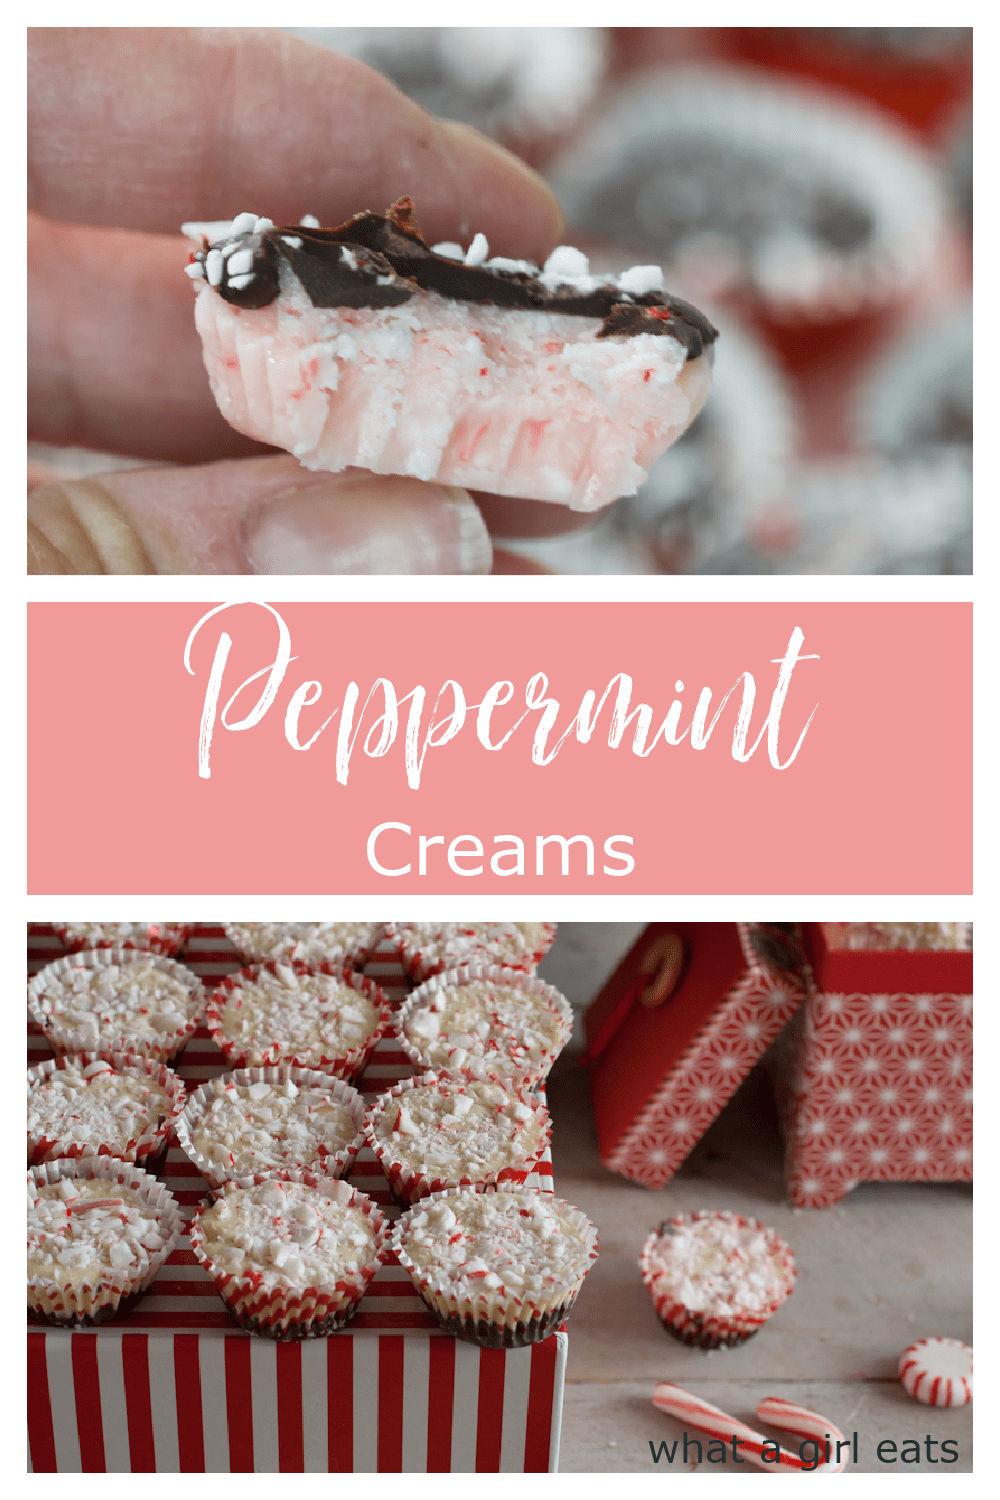 Peppermint Creams have a white chocolate cream center with crushed peppermint, topped with semi-sweet chocolate and peppermint dust.